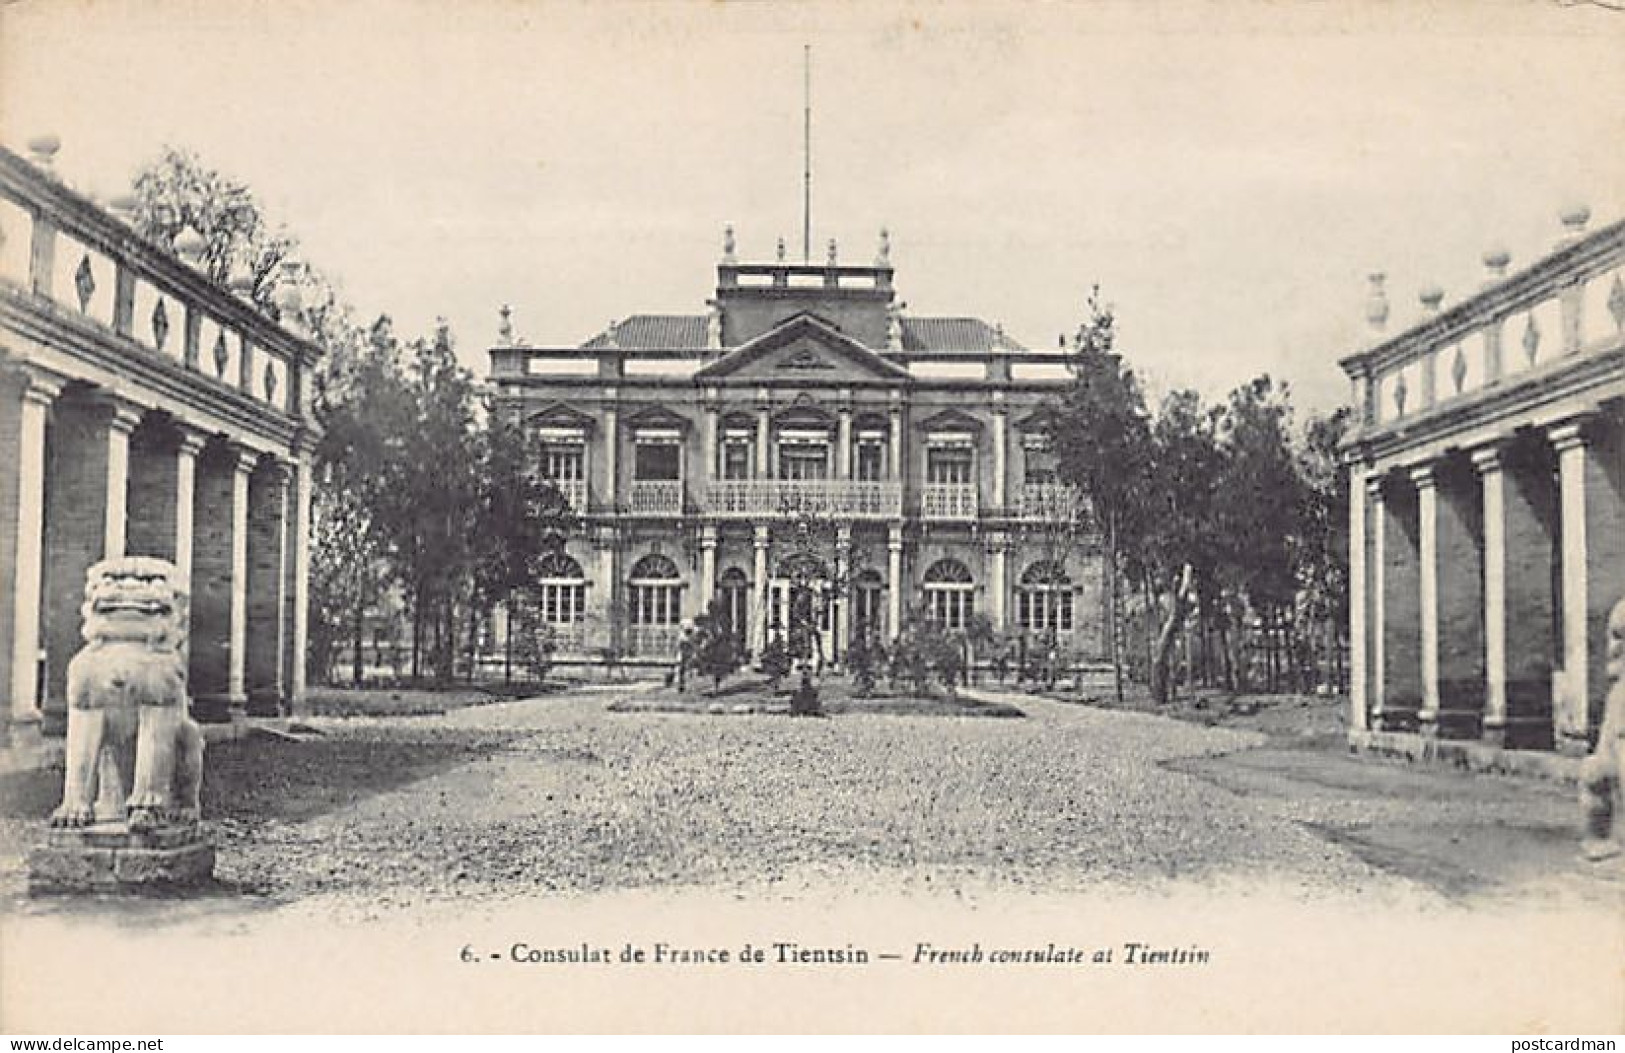 China - TIANJIN - The French Consulate - Publ. M.M. Messageries Maritimes 6 - China